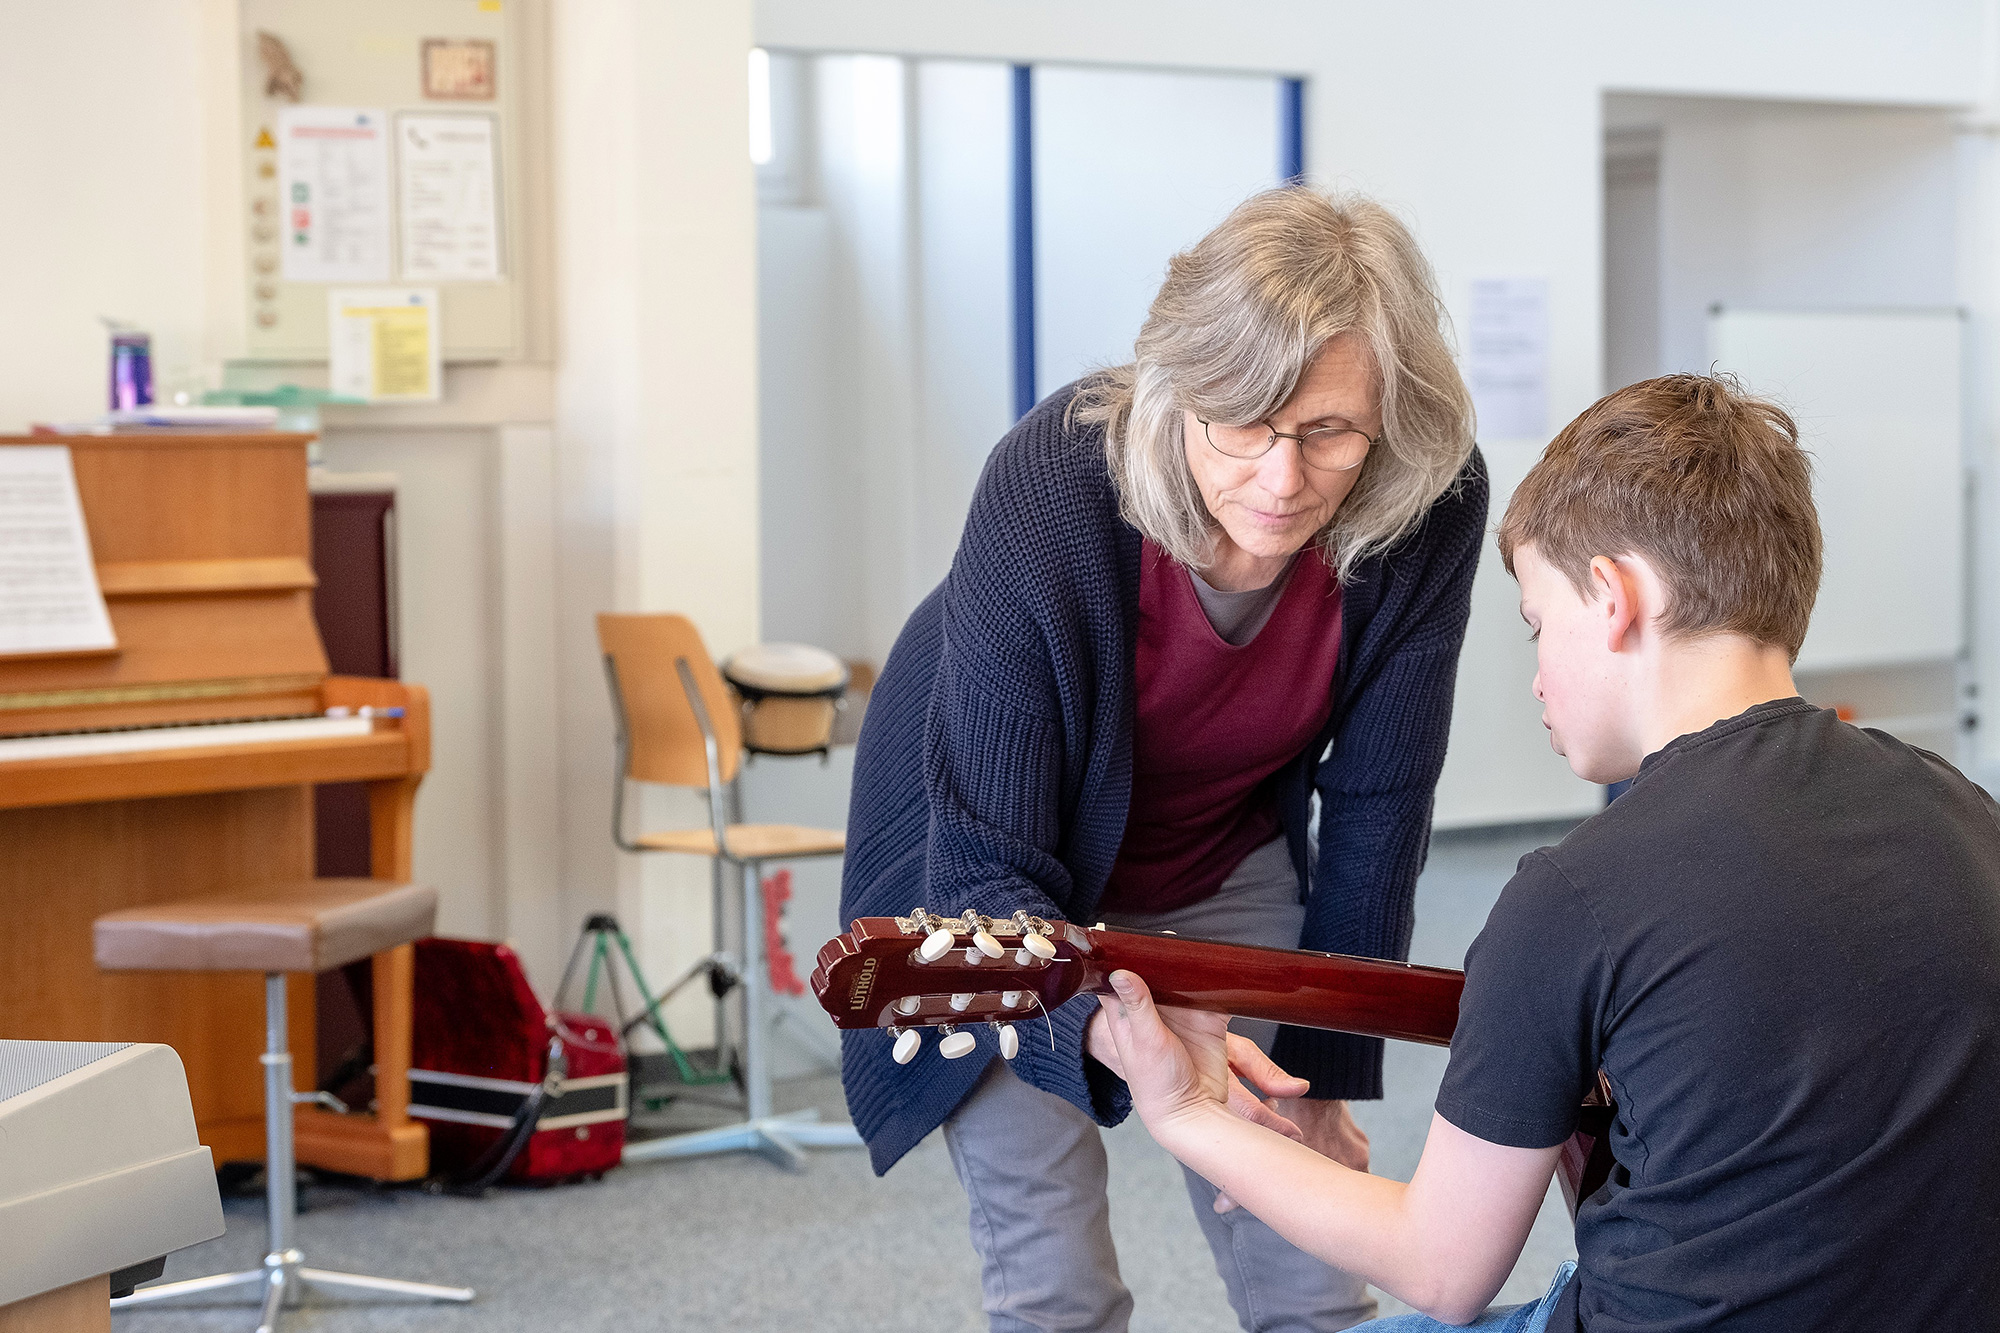 A boy practices playing the guitar and the teacher stands by his side.	